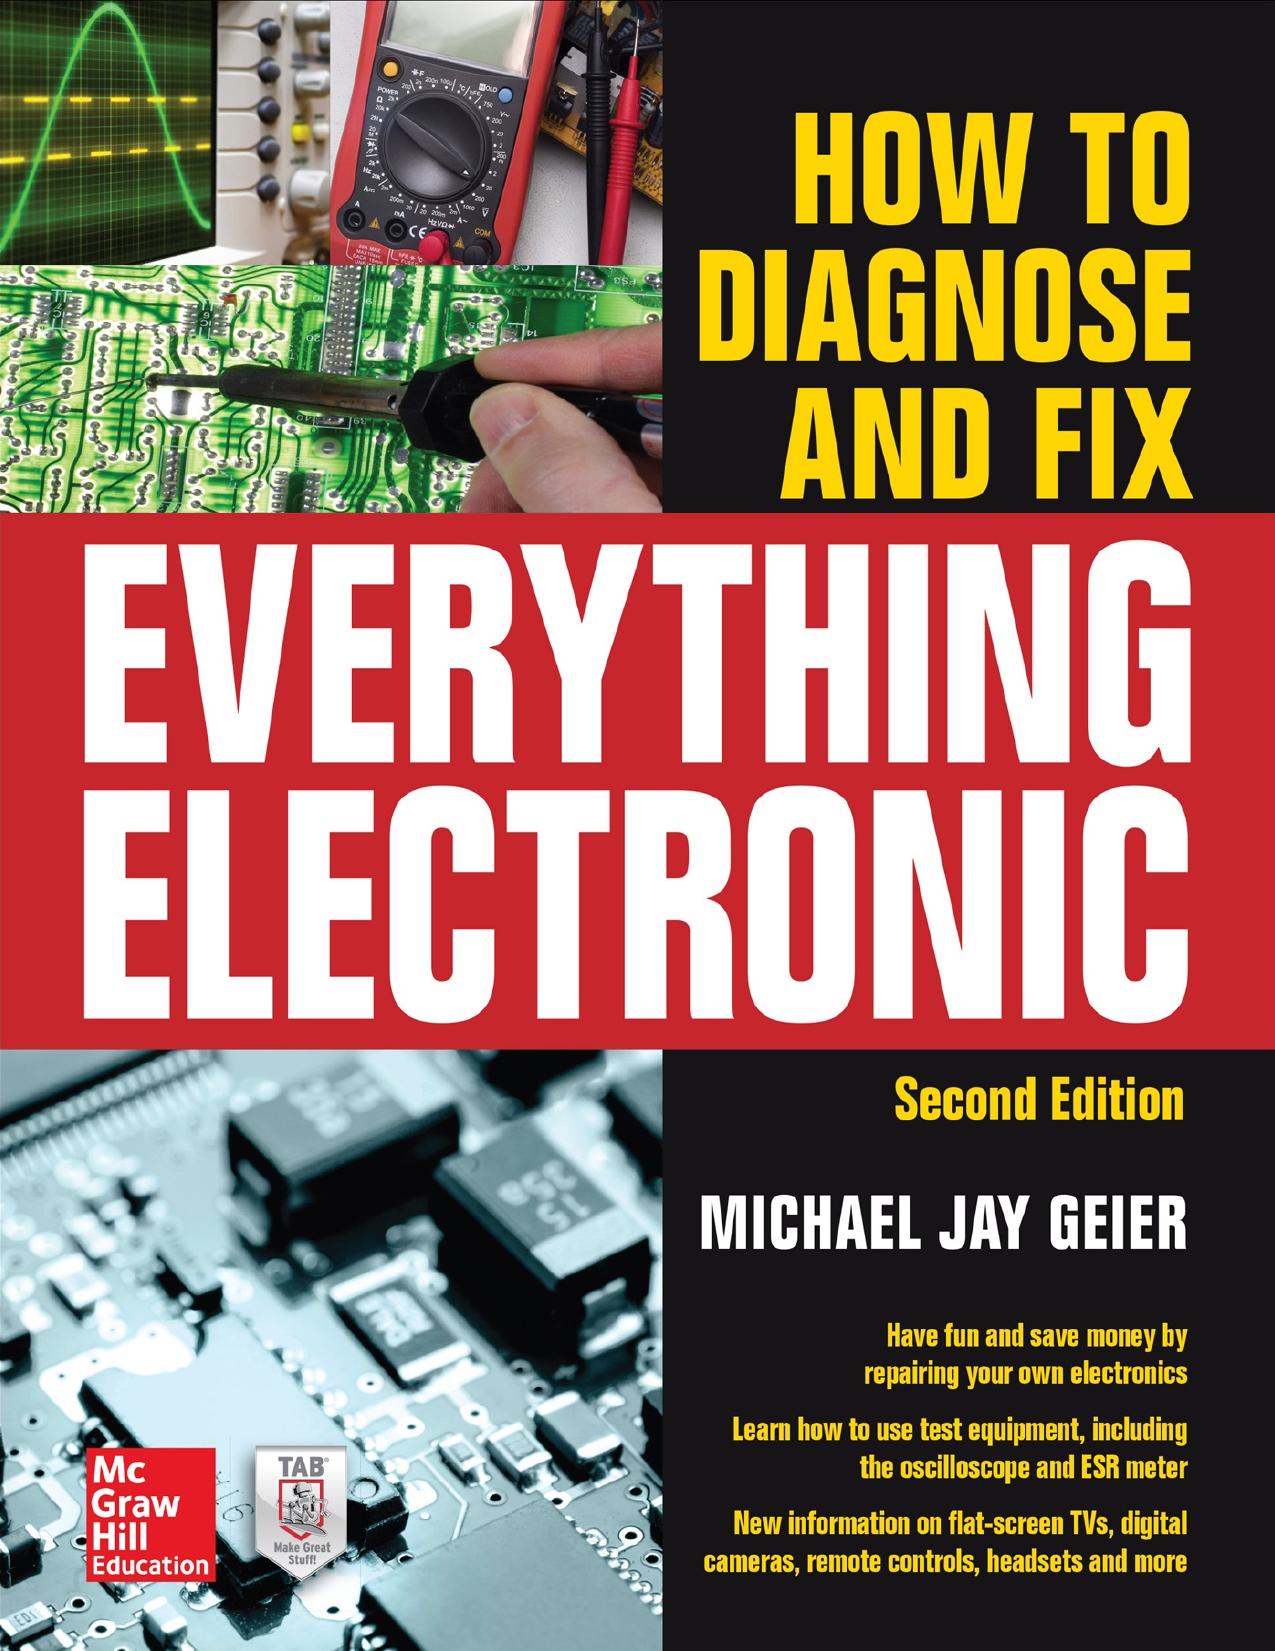 How to Diagnose and Fix Everything Electronic by Michael Geier